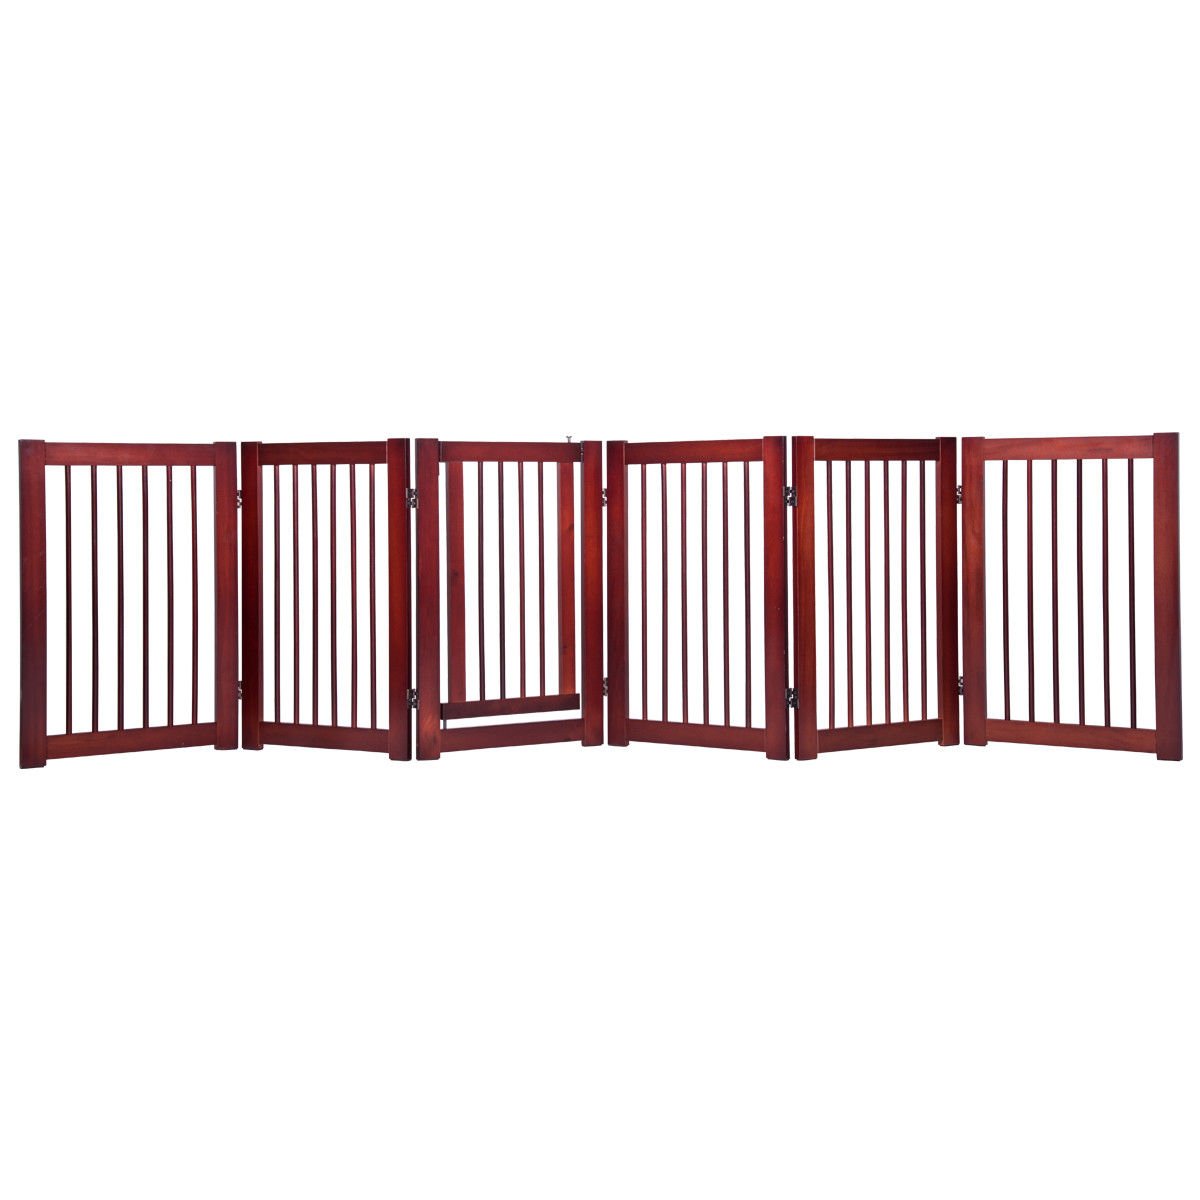 30'' Configurable Folding Free Standing Wood Pet Dog Safety Fence W/ Gate - Cherry, 4 Panel